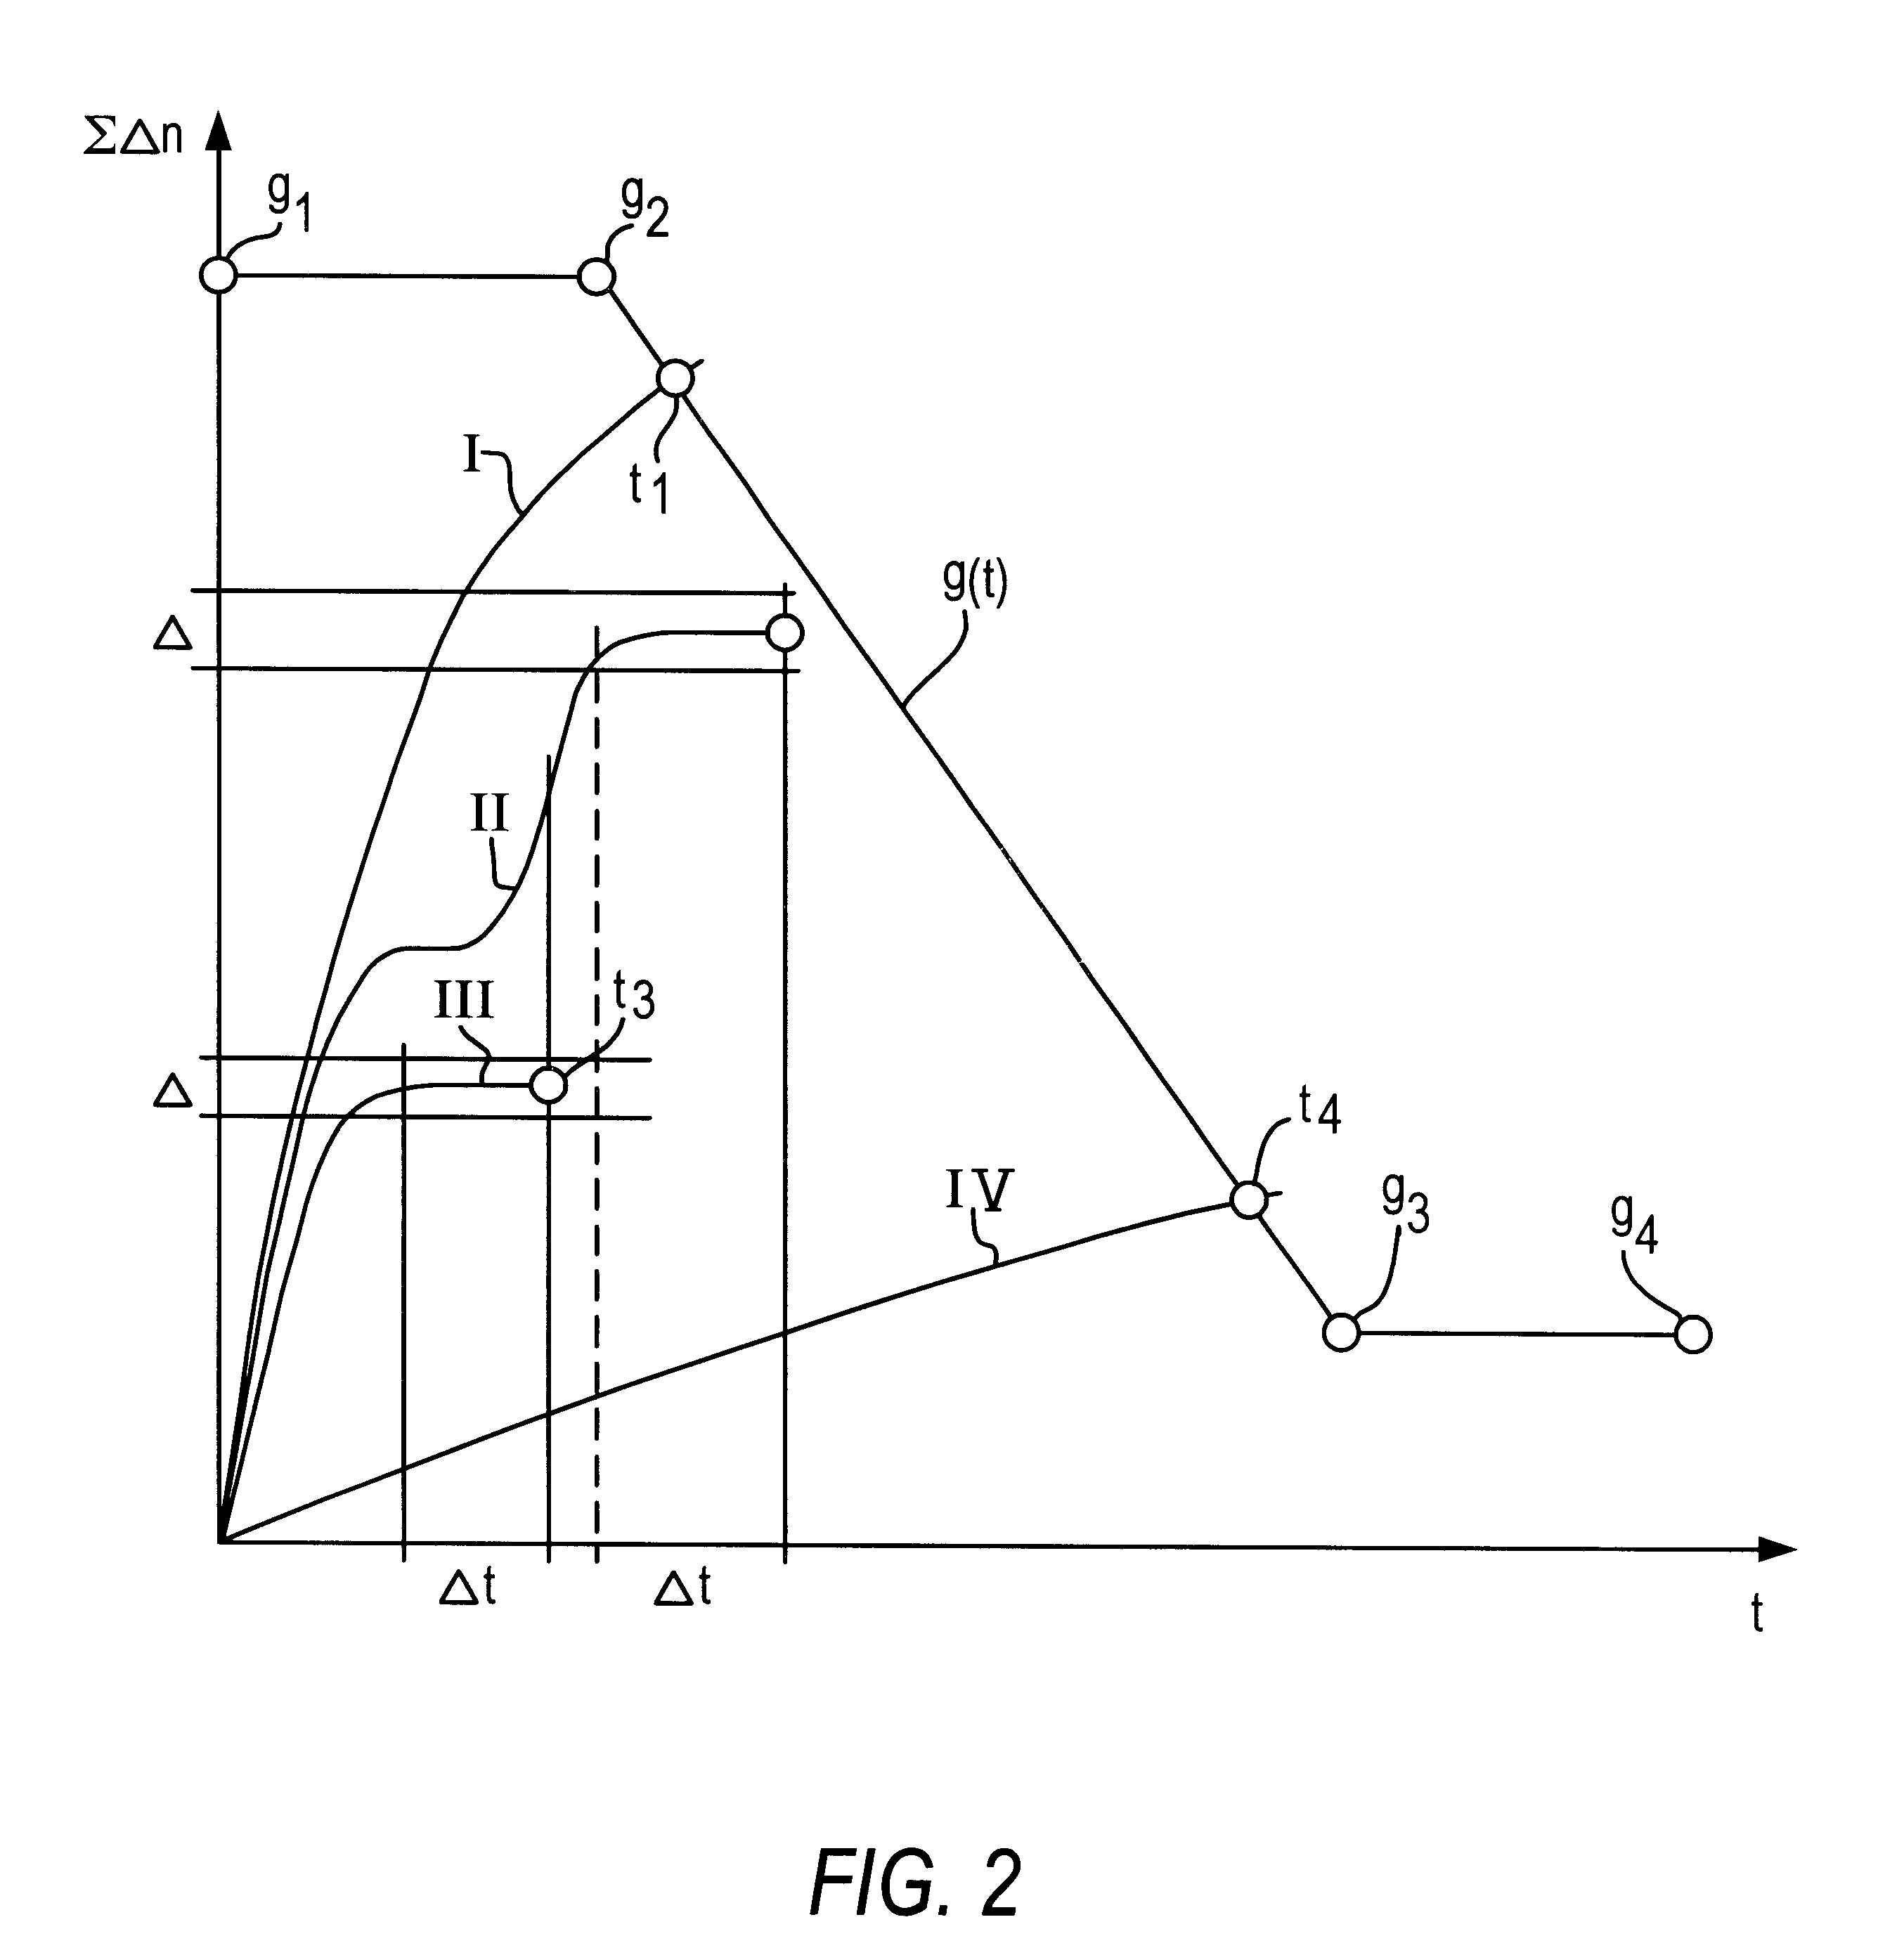 Method for limiting the closing force of movable components